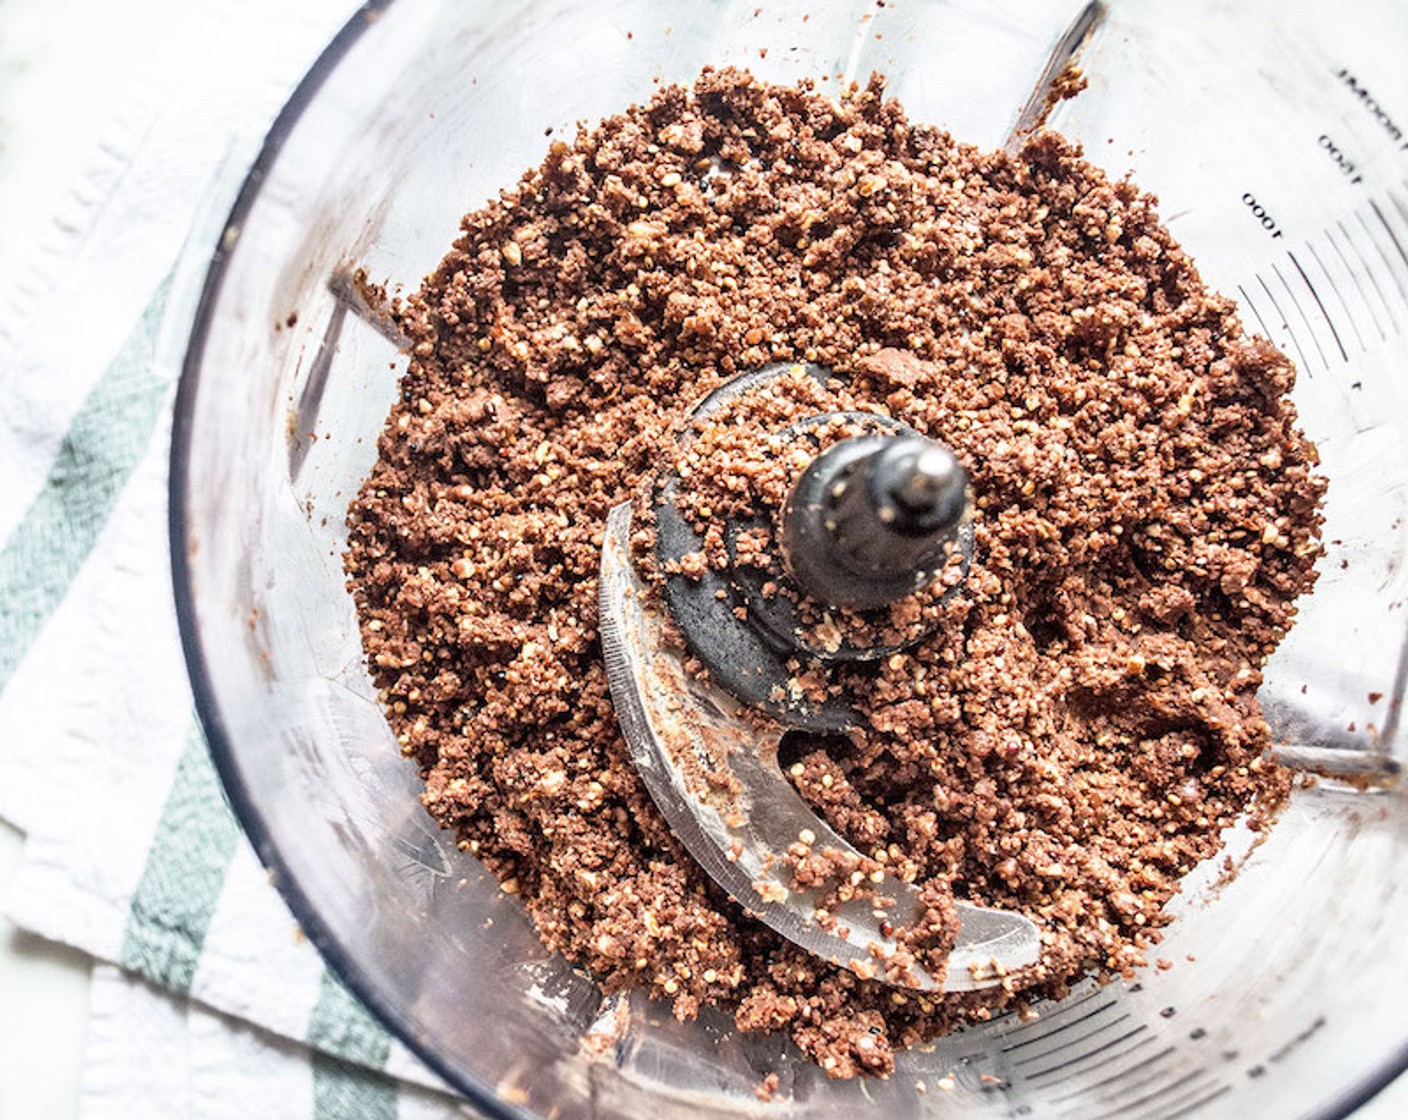 step 6 Scrape down sides and add Pea Protein Powder (1/4 cup), Cacao Powder (1/3 cup), toasted quinoa, and Vanilla Extract (1 tsp) continue to blend another 15-20 seconds, stopping to scrape down sides as needed. The mixture should be a fine crumbly consistency.